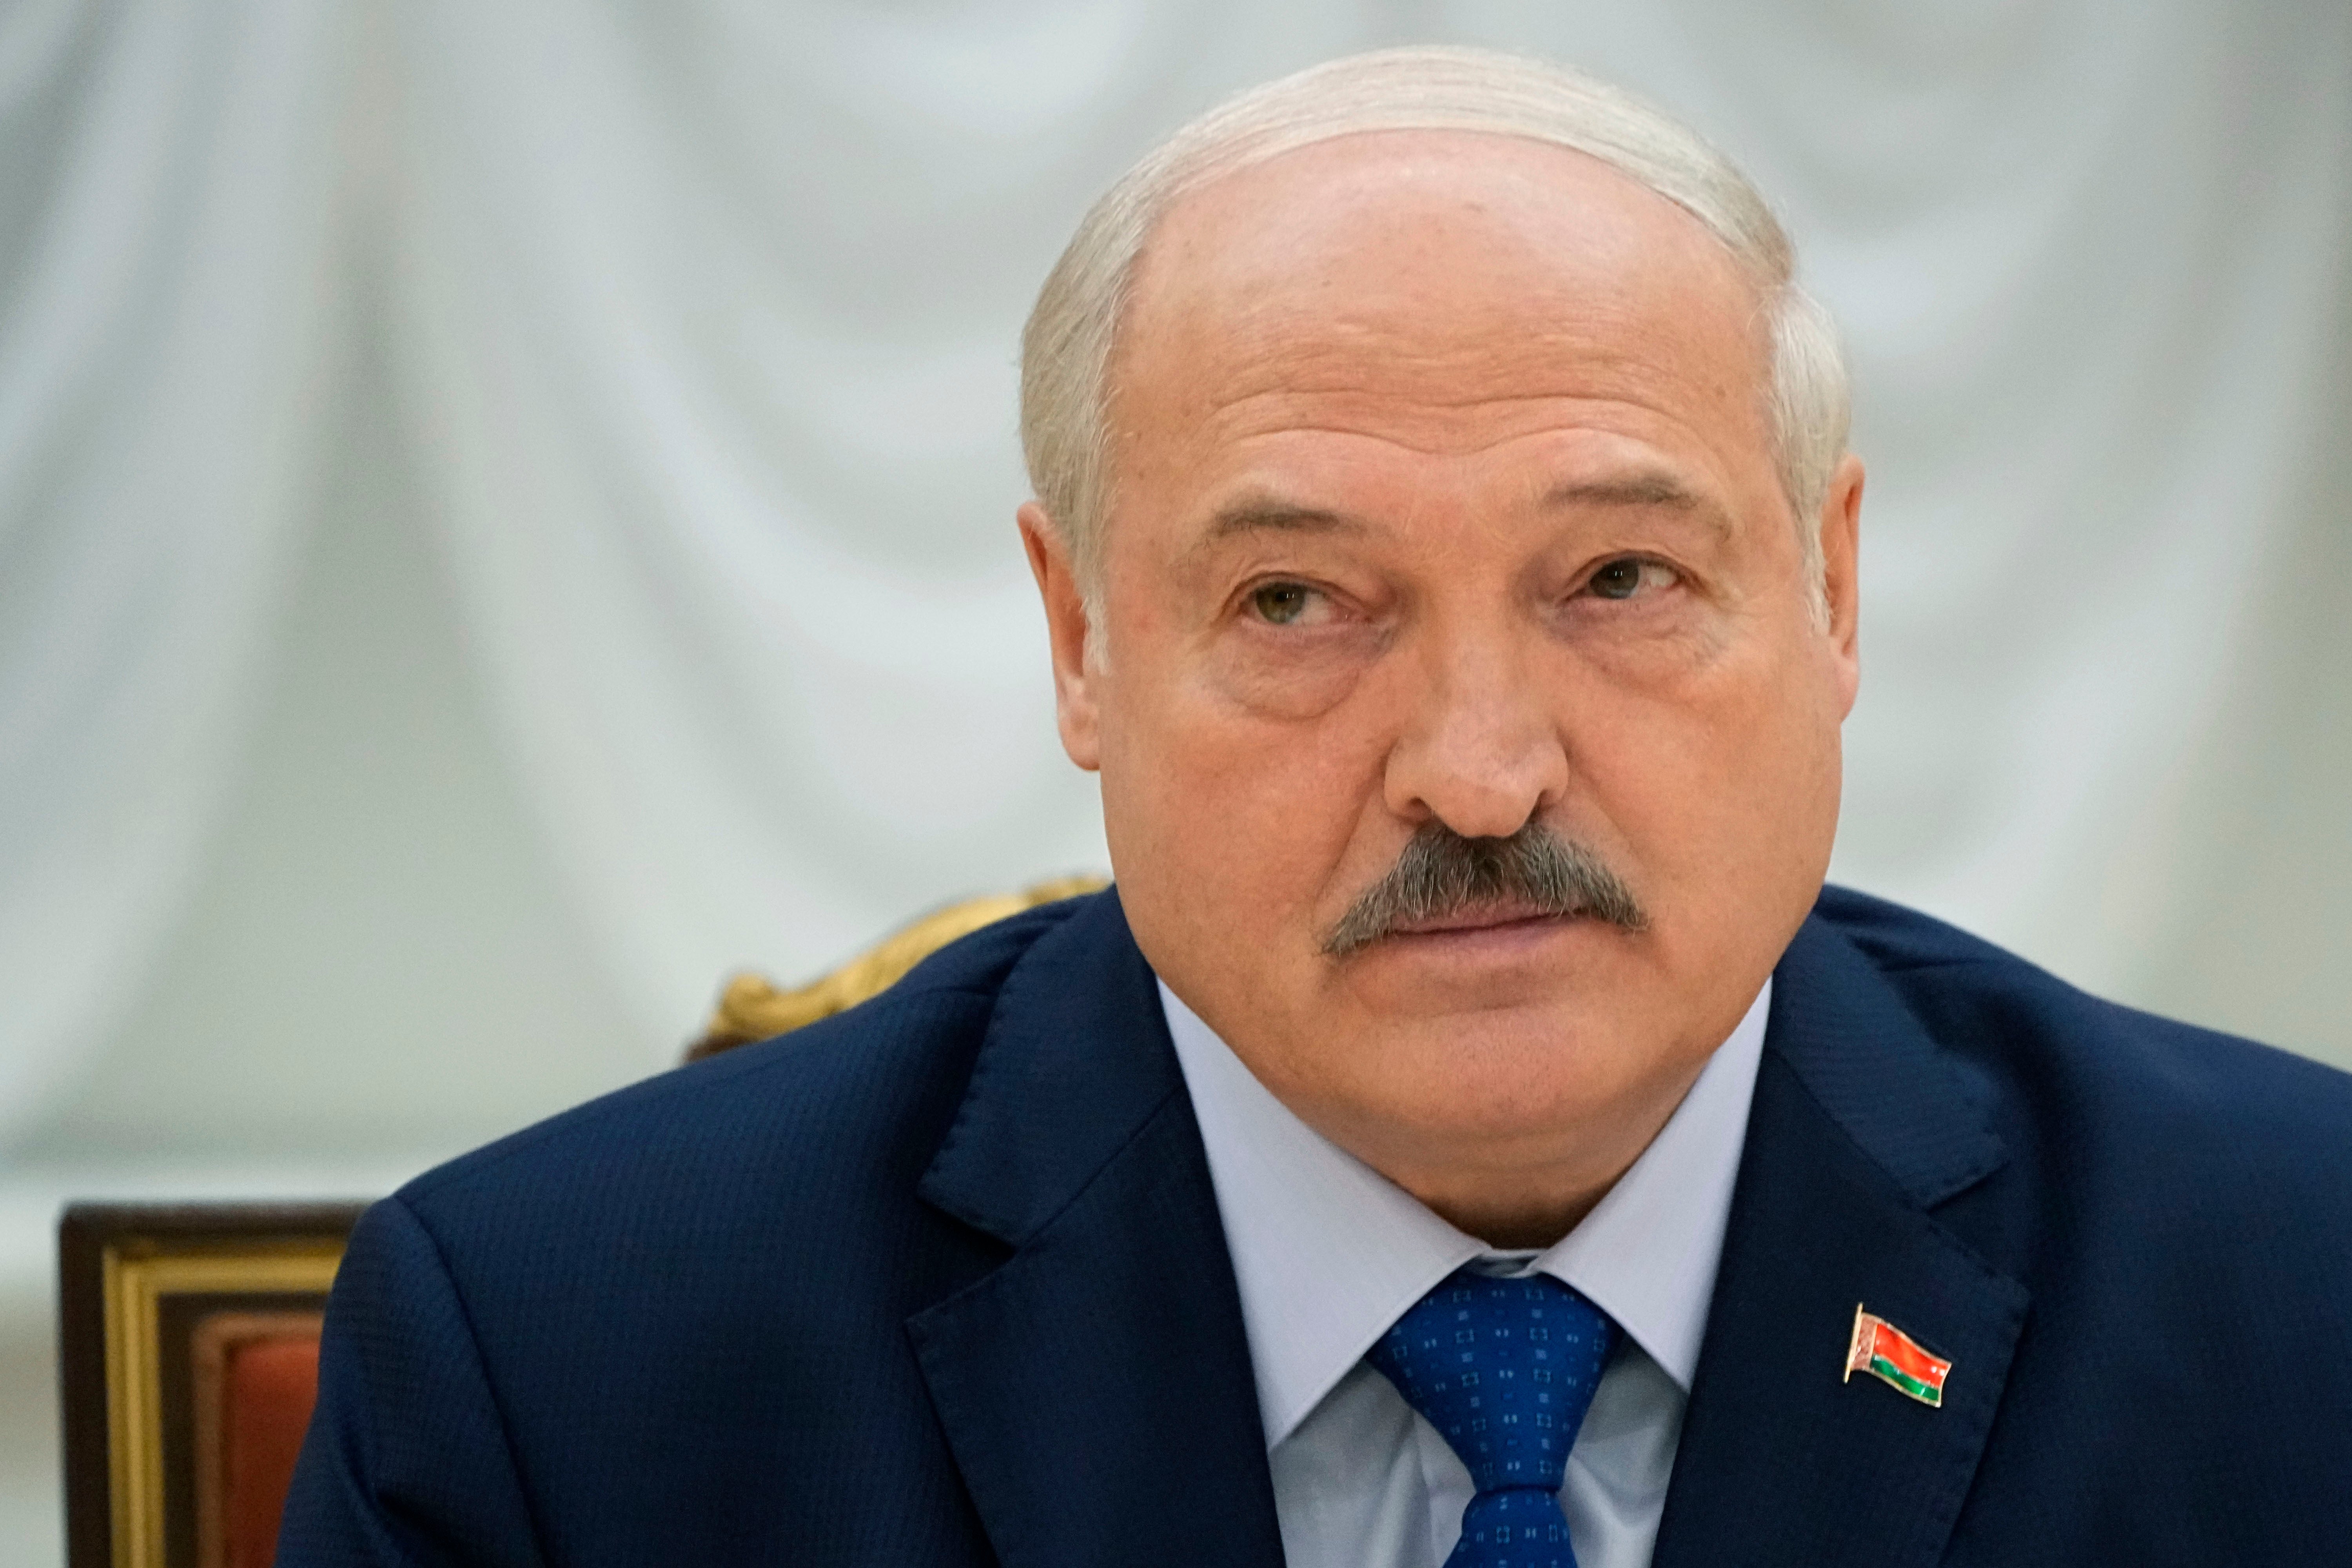 Lukashenko is known as Europe’s last dictator